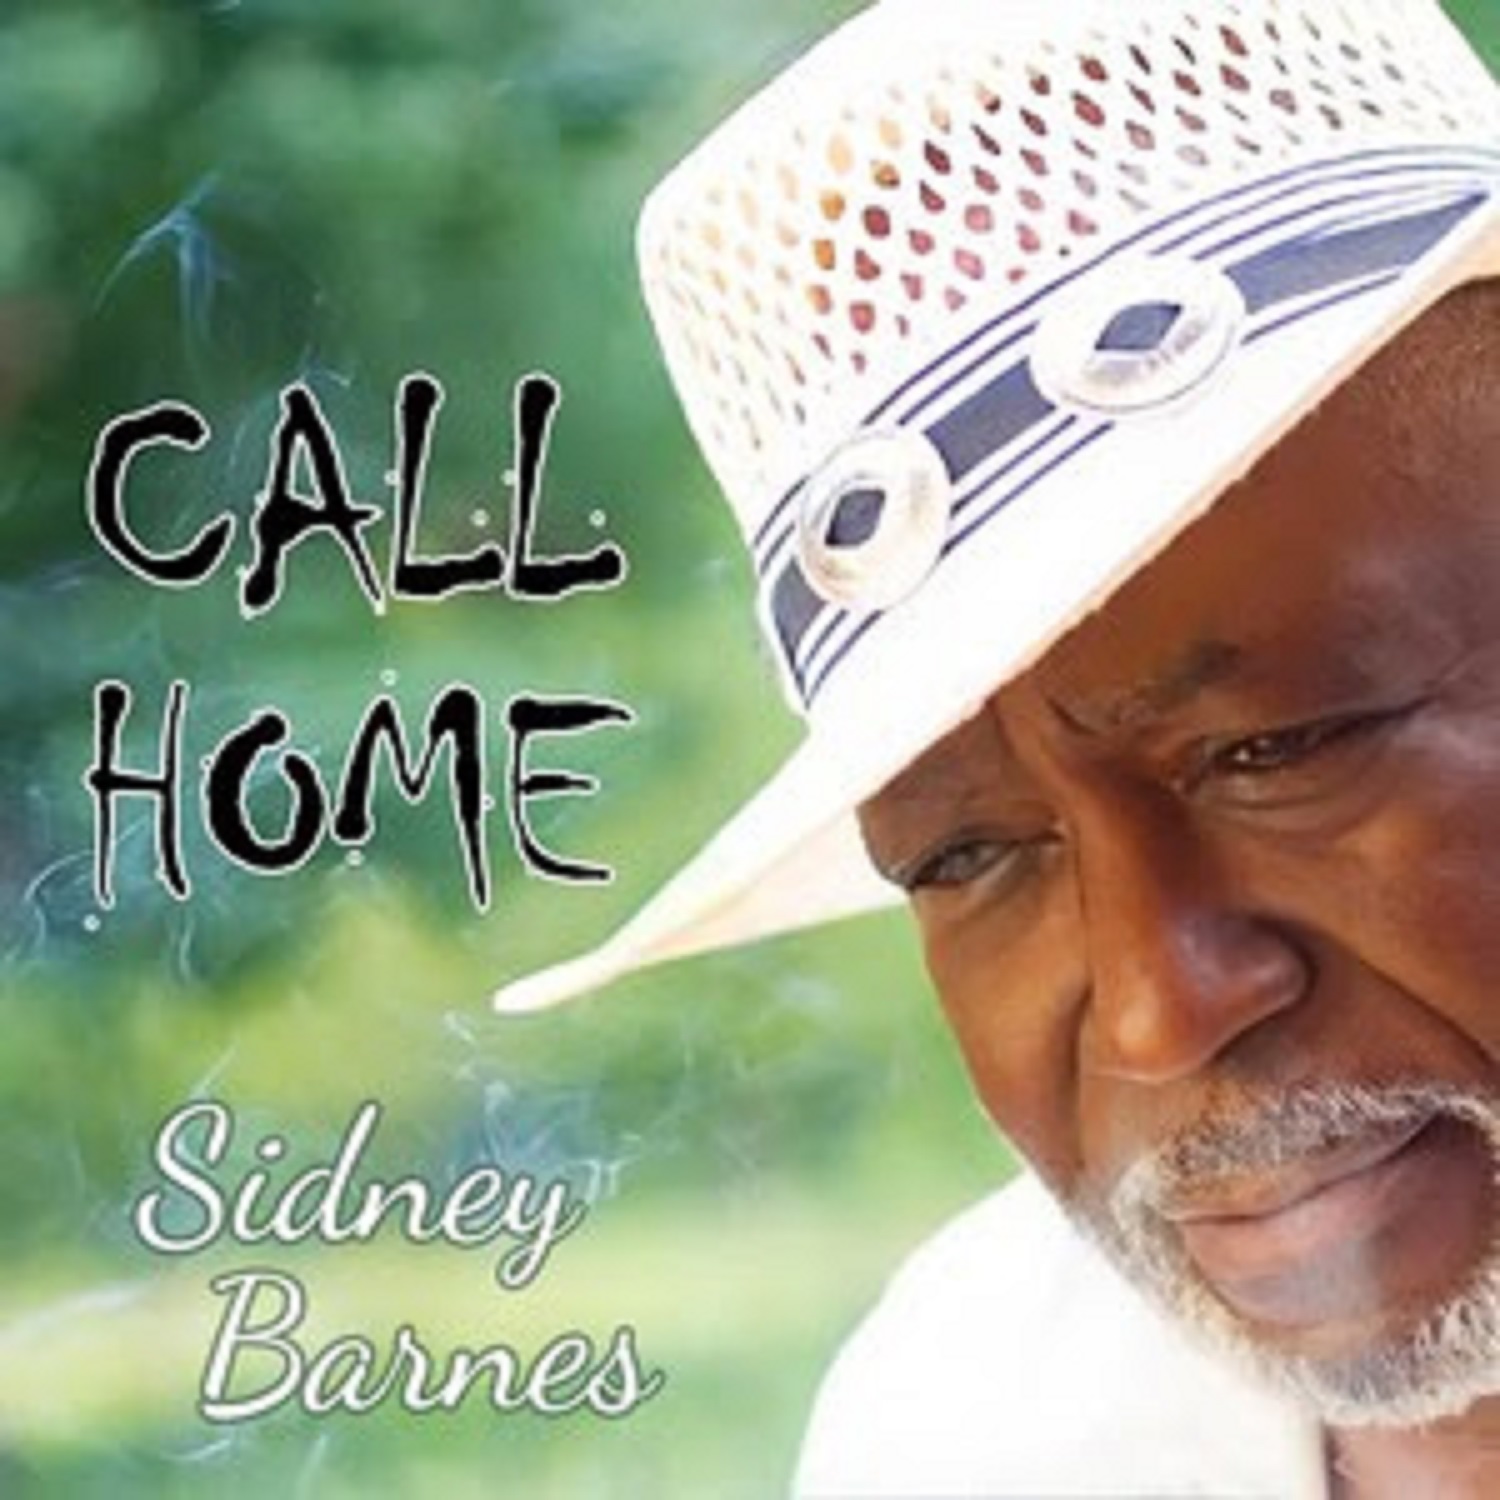 Celebrating a Legendary Presence in the Soul Realm- 81-Year-Old Soul Icon Sidney Barnes Drops Breathtaking New Single